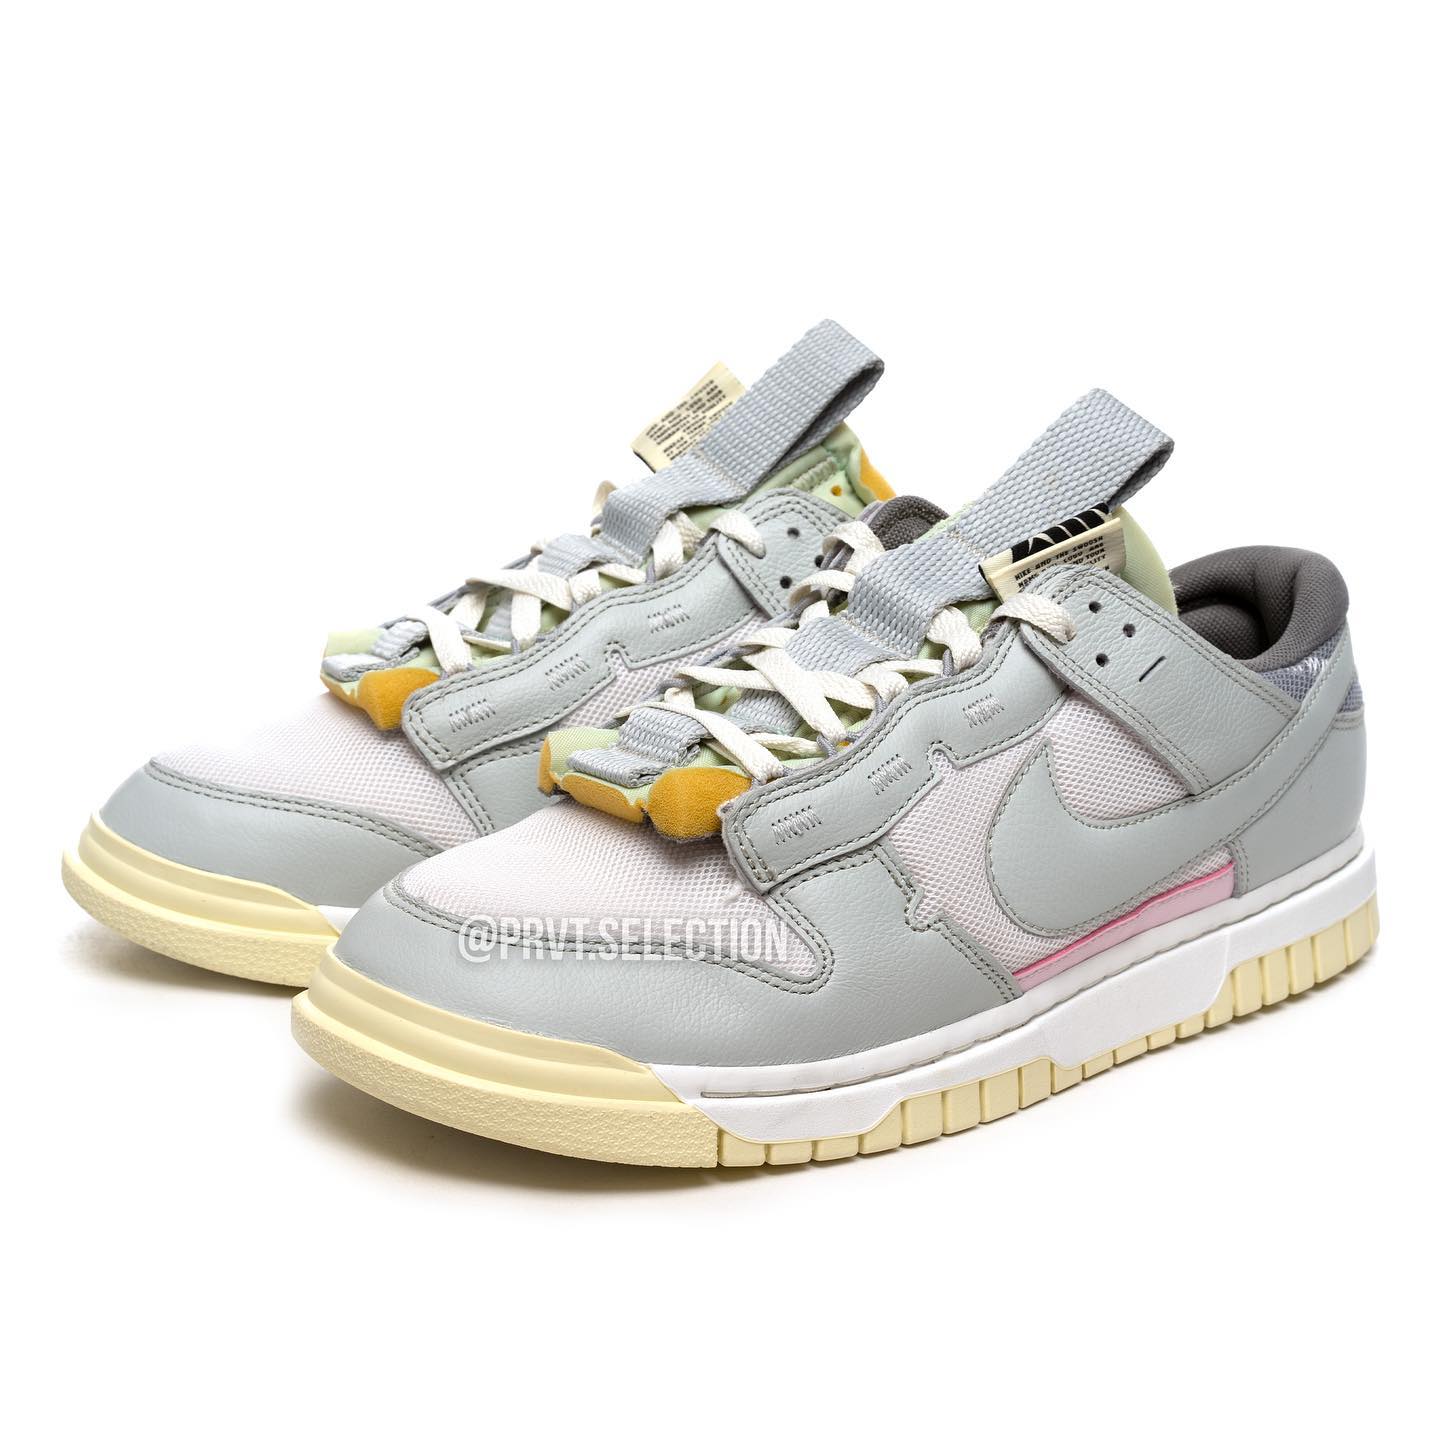 Nike,Dunk Low Remastered  全新造型来了！Dunk Low 正式曝光！